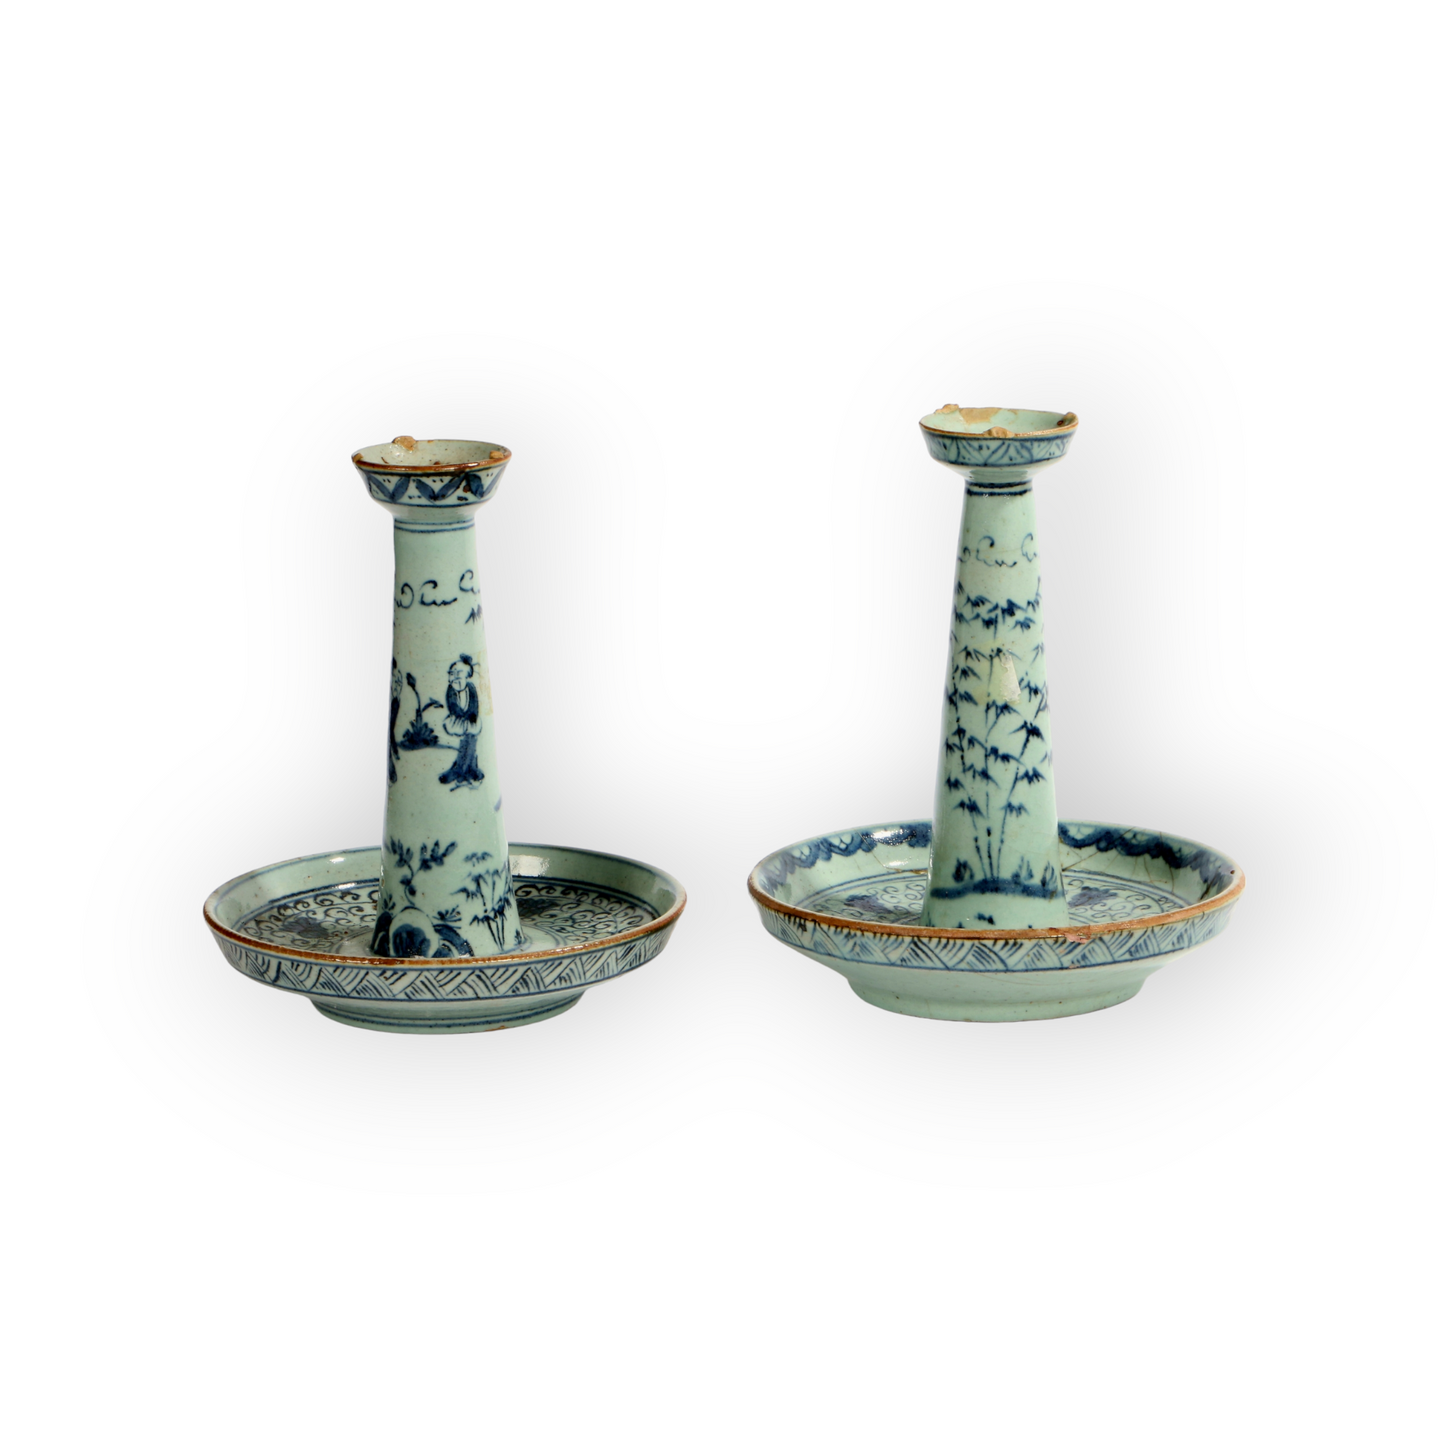 Pair of 18th Century Chinese Antique Qing Dynasty Blue & White Porcelain Candlesticks